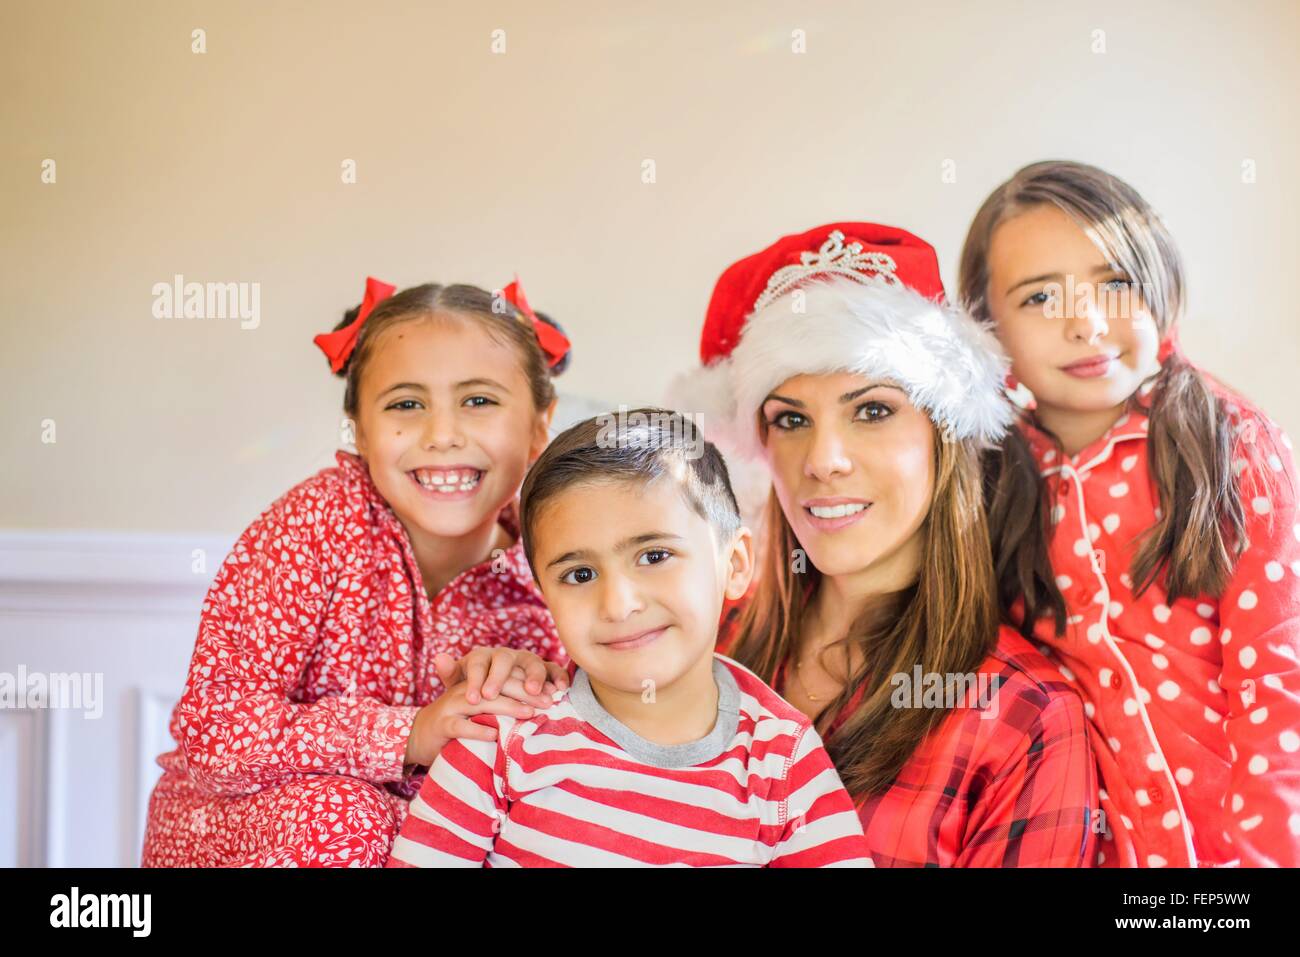 Portrait of mother and children, mother wearing festive hat Stock Photo